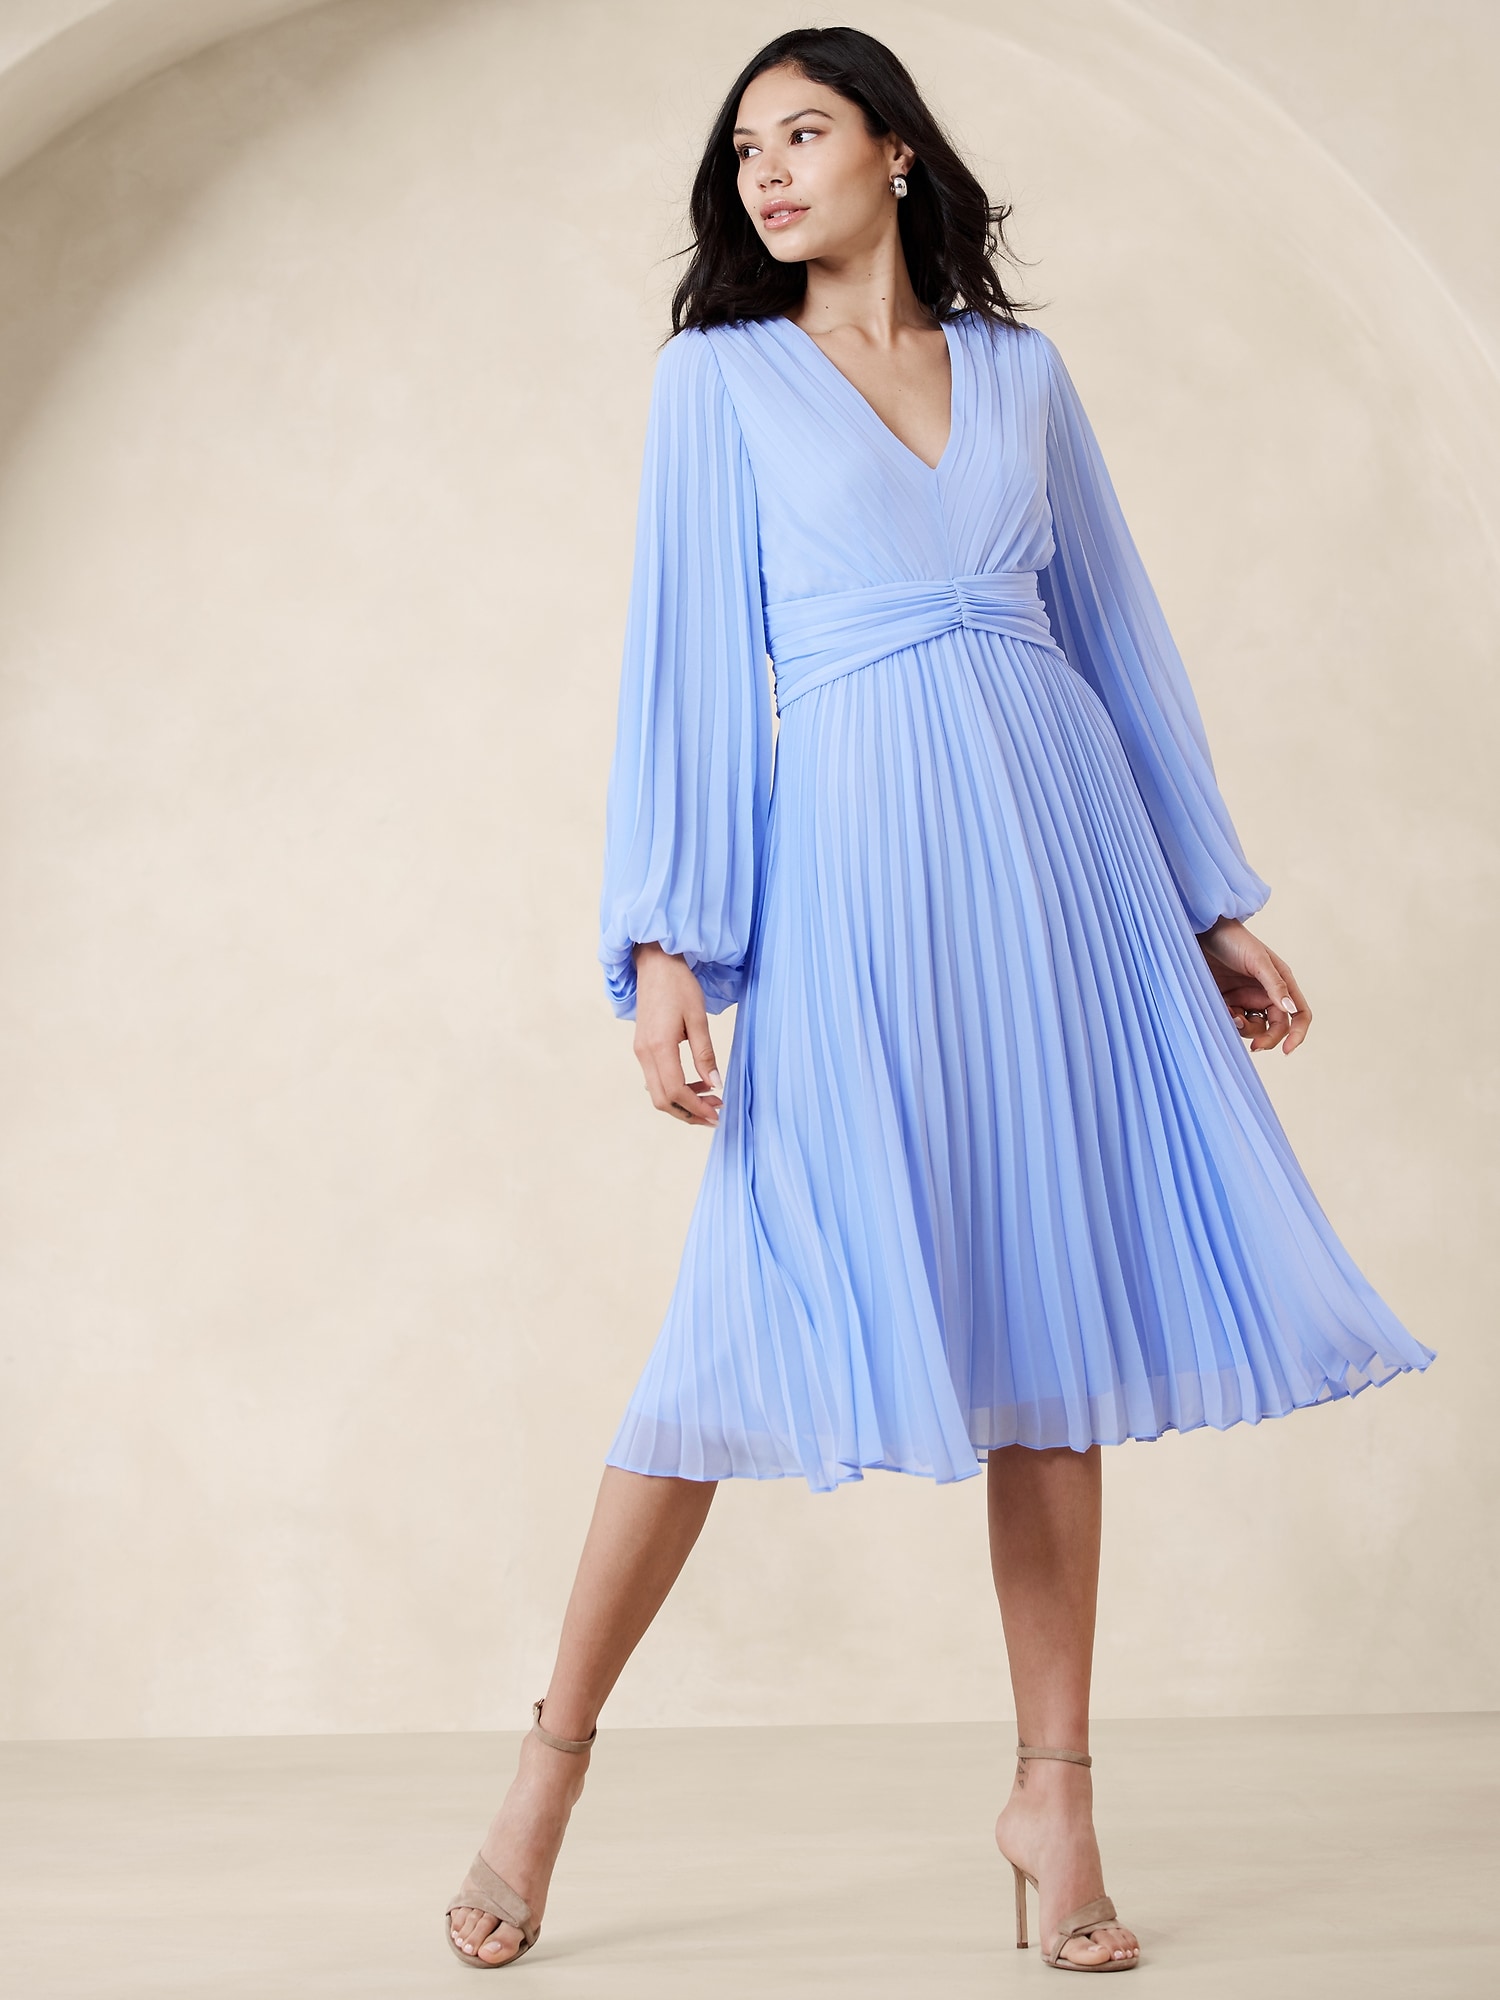 Evening Out Pleated Dress Styling